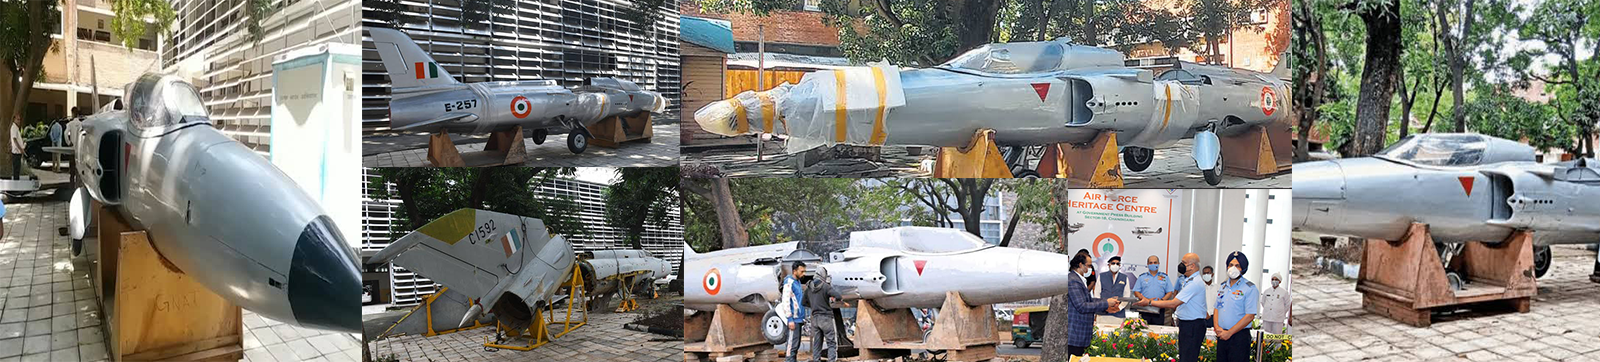 IAF Heritage Centre in Chandigarh, The First of its Kind in India